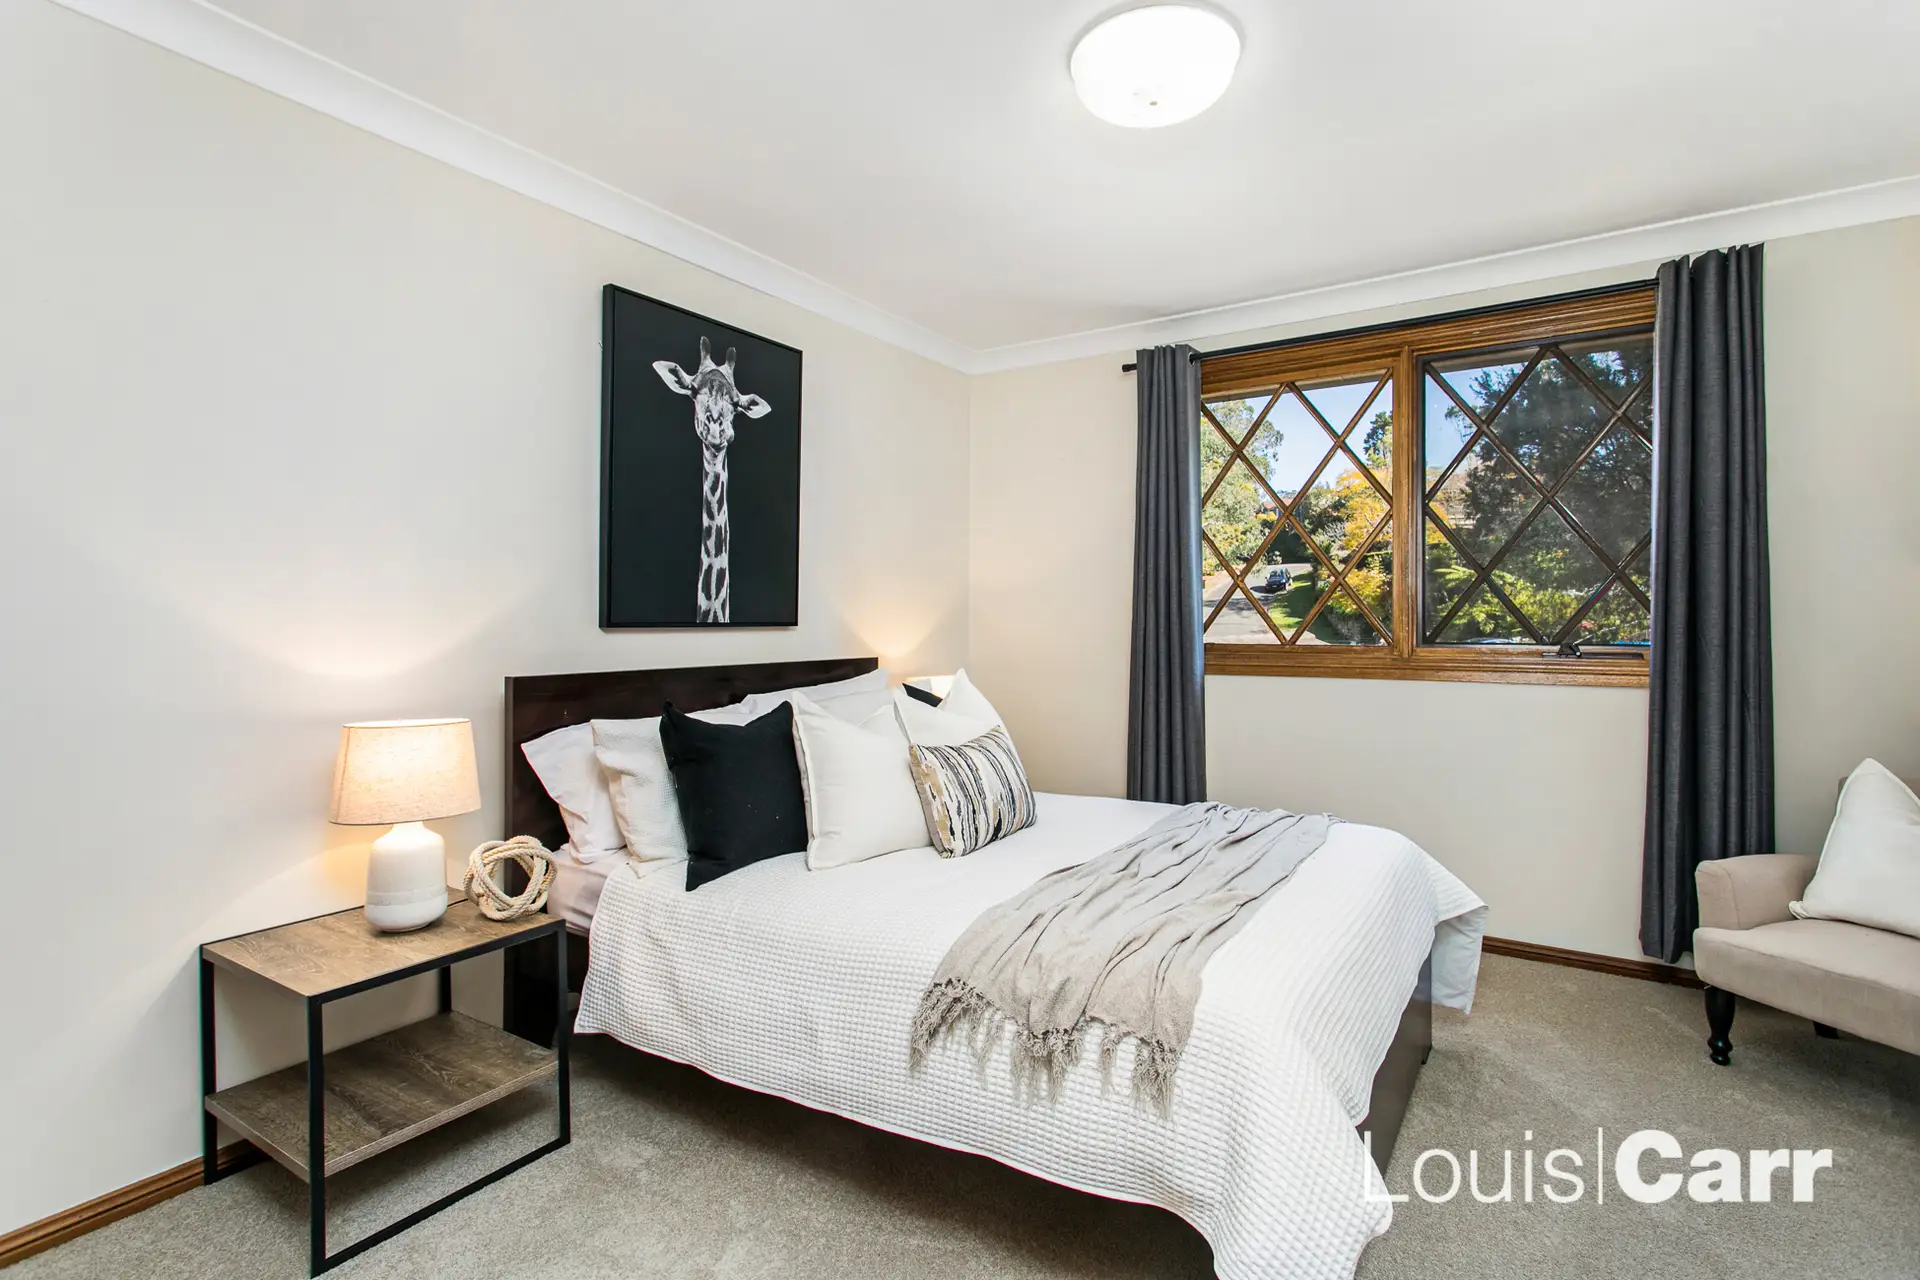 Photo #9: 10 Wesley Place, Cherrybrook - Sold by Louis Carr Real Estate